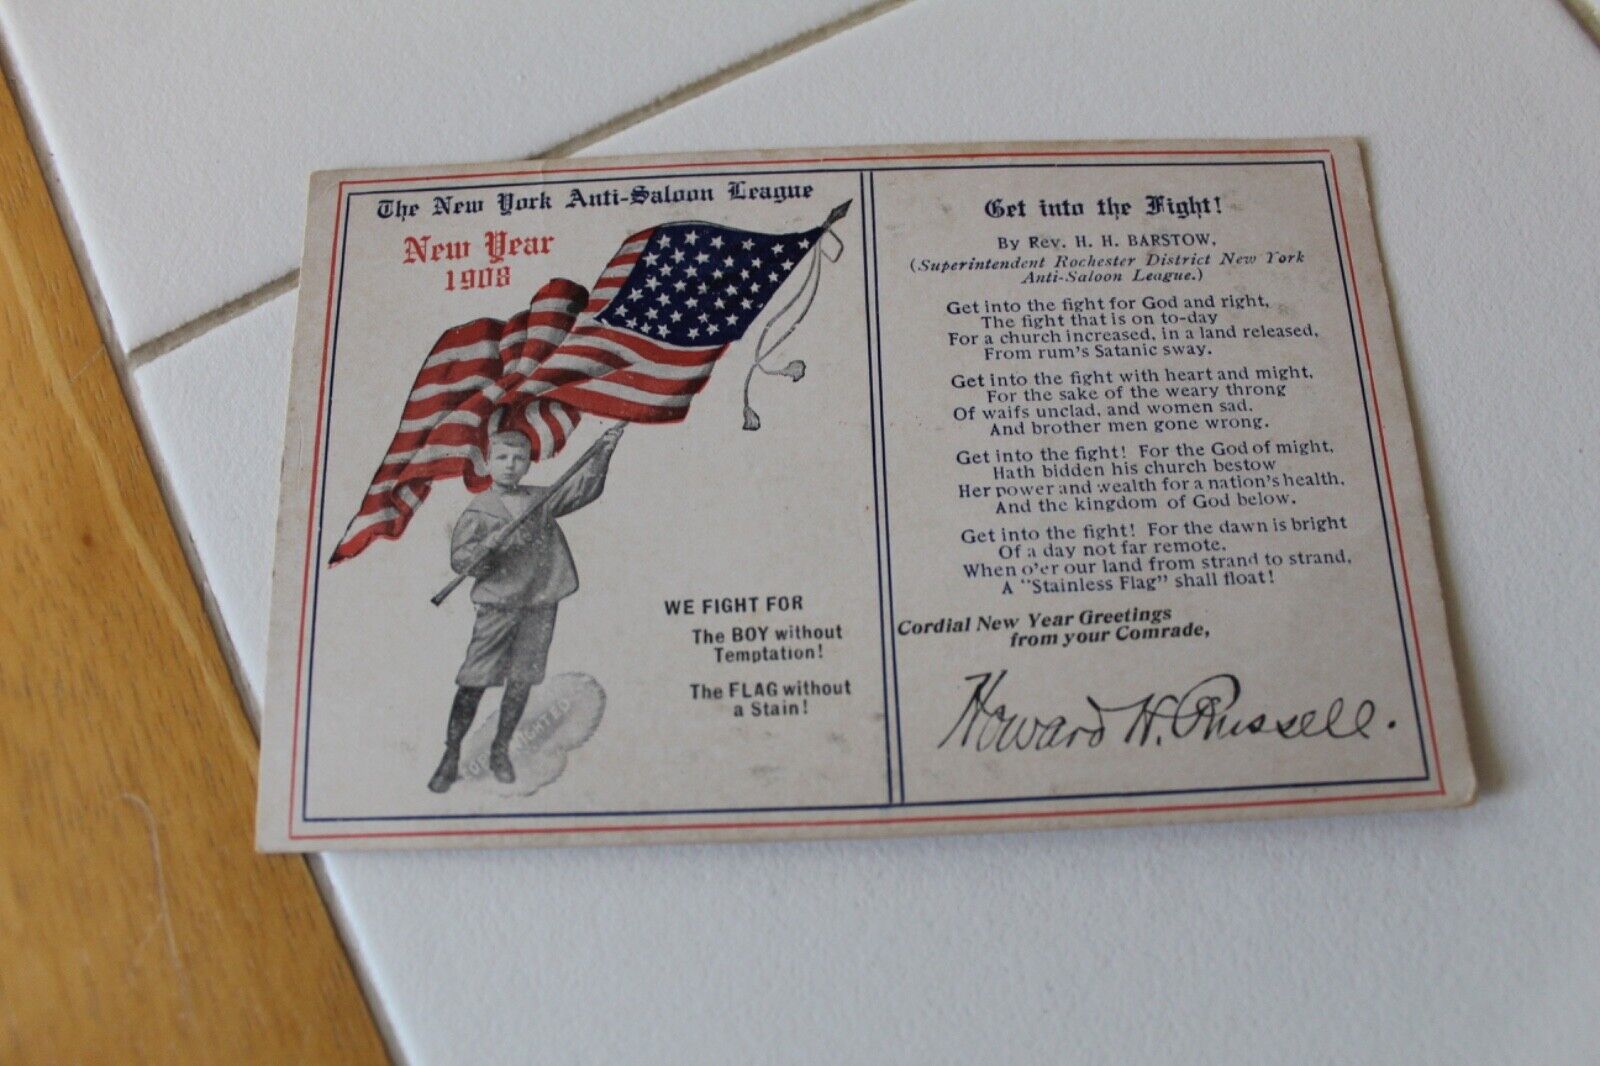 VTG 1908 ROCHESTER NEW YORK ANTI SALOON LEAGUE CARD FIGHT FOR FLAG AND BOY